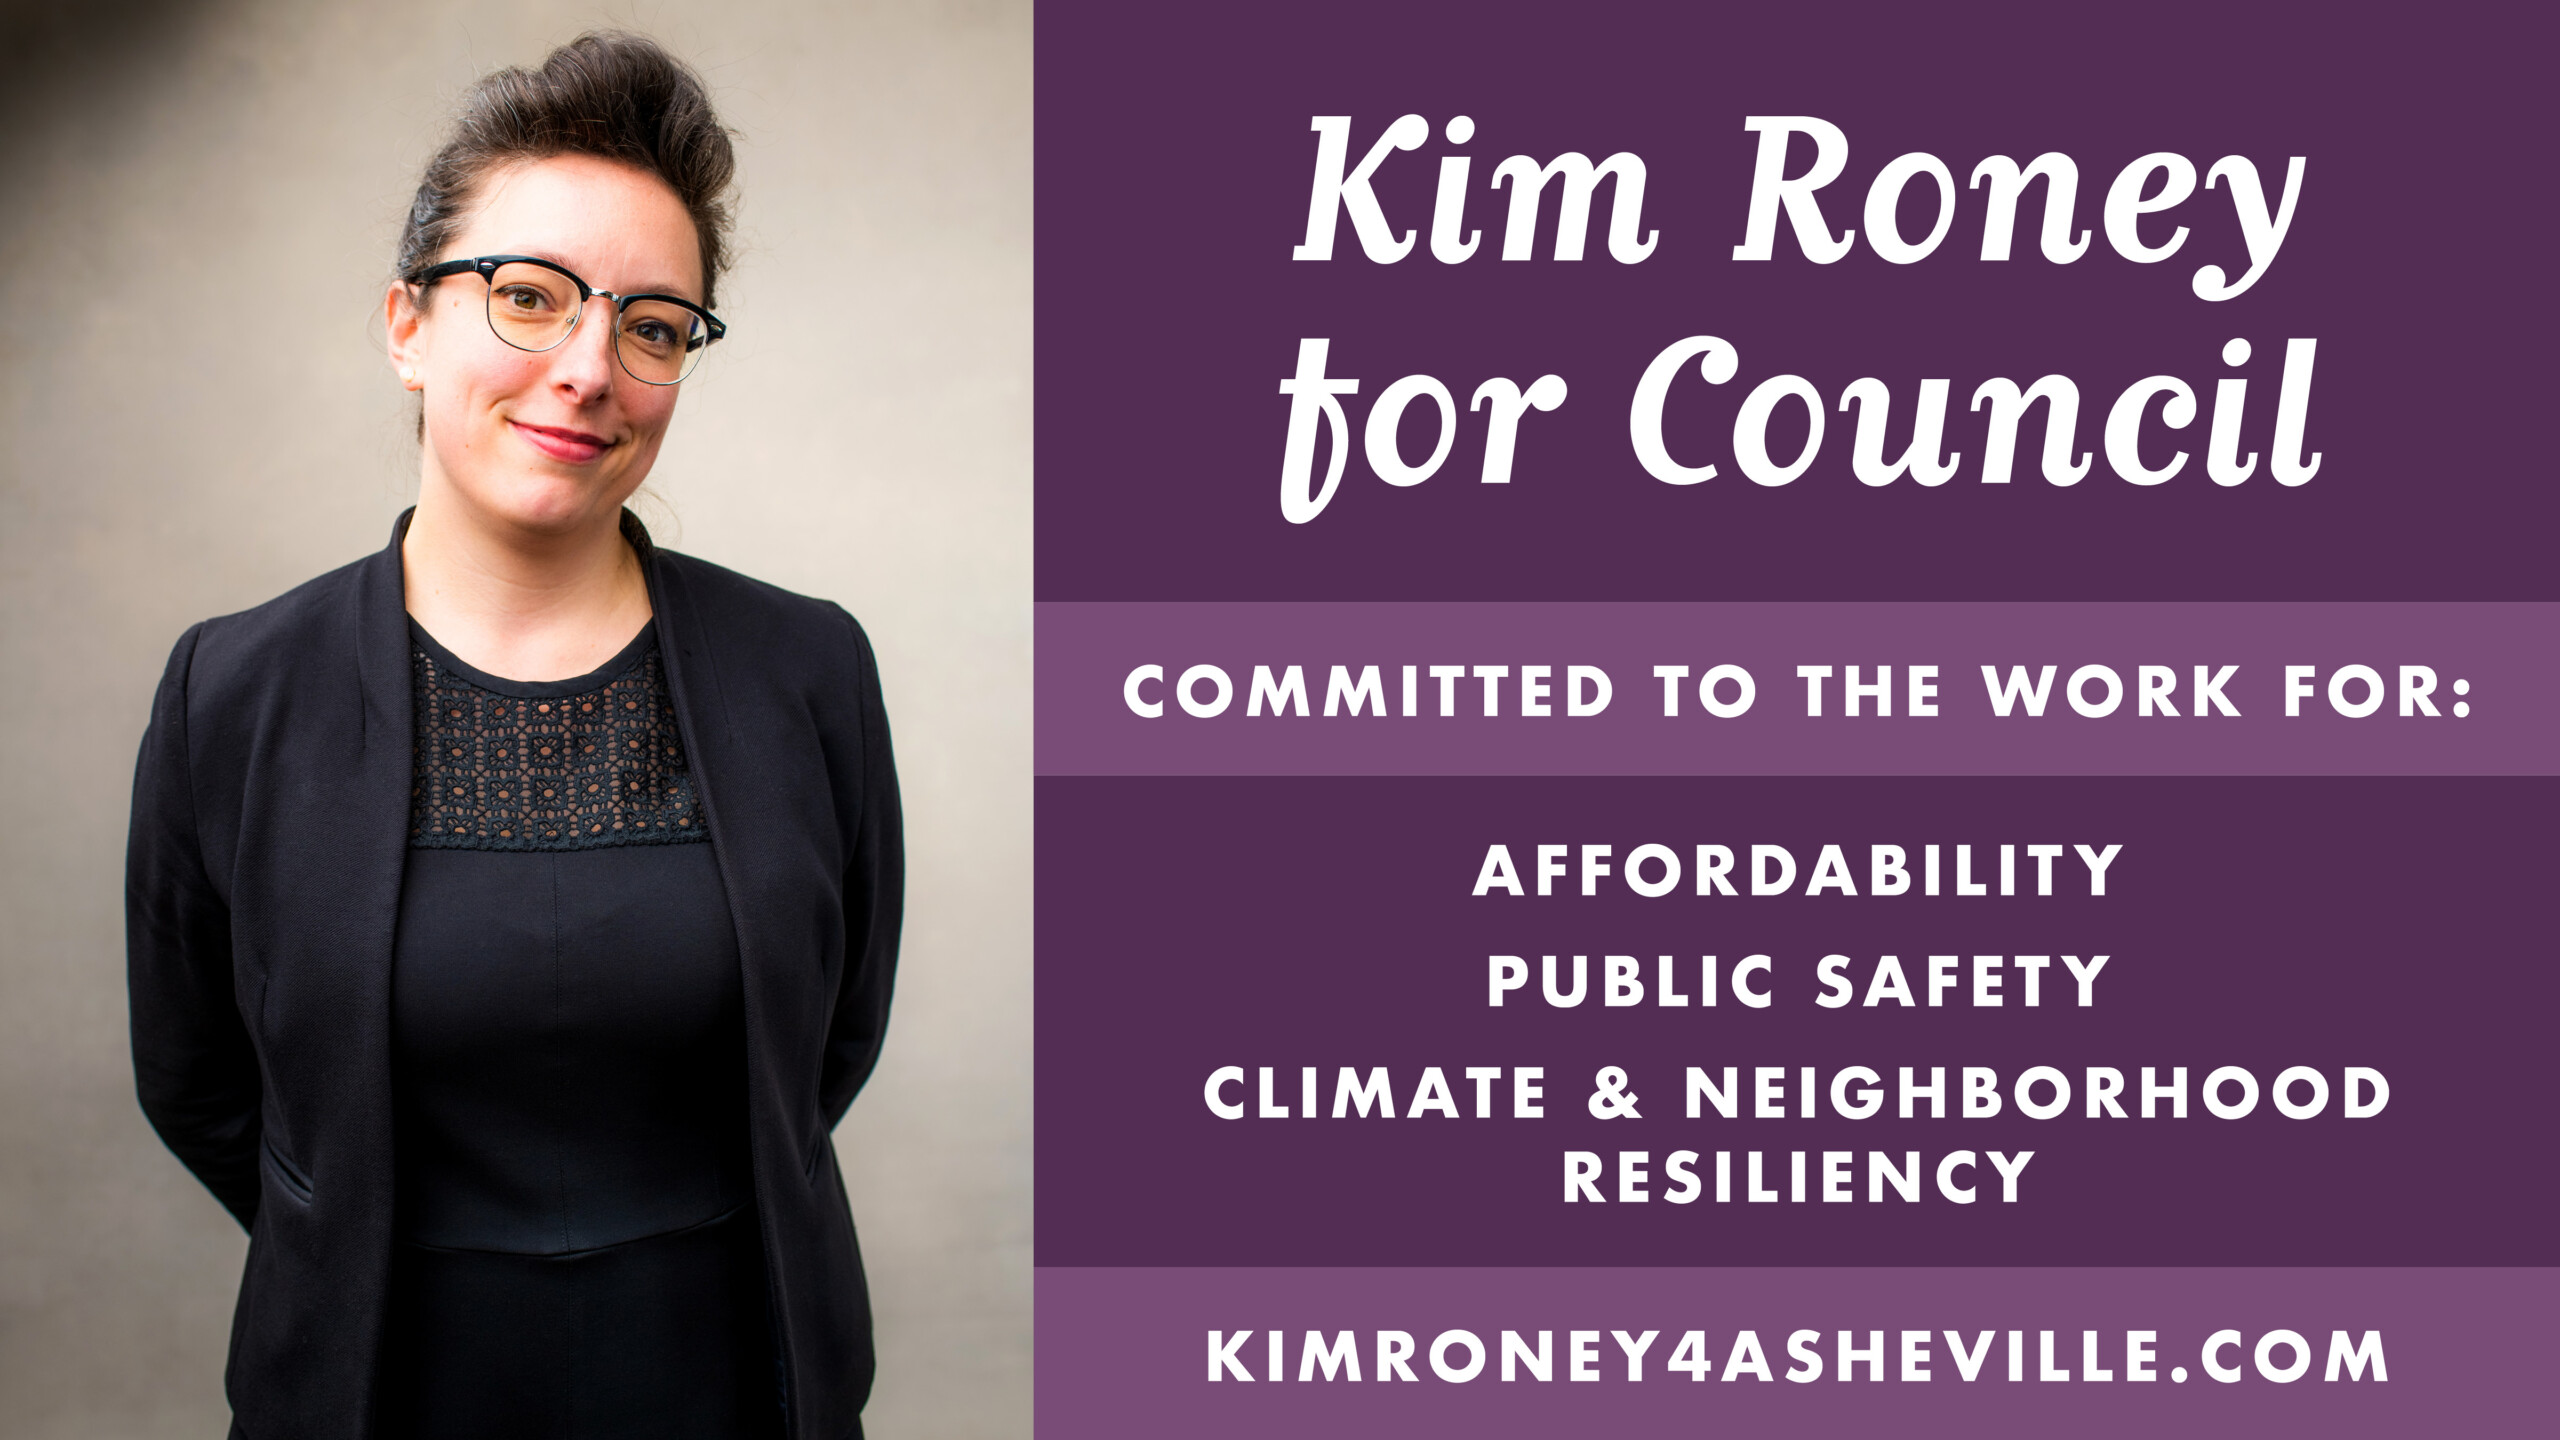 Kim Roney stands facing viewer, text reads: Kim Roney for Council, committed to the work for Affordability, Public Safety, Climate & Neighborhood Resiliency.